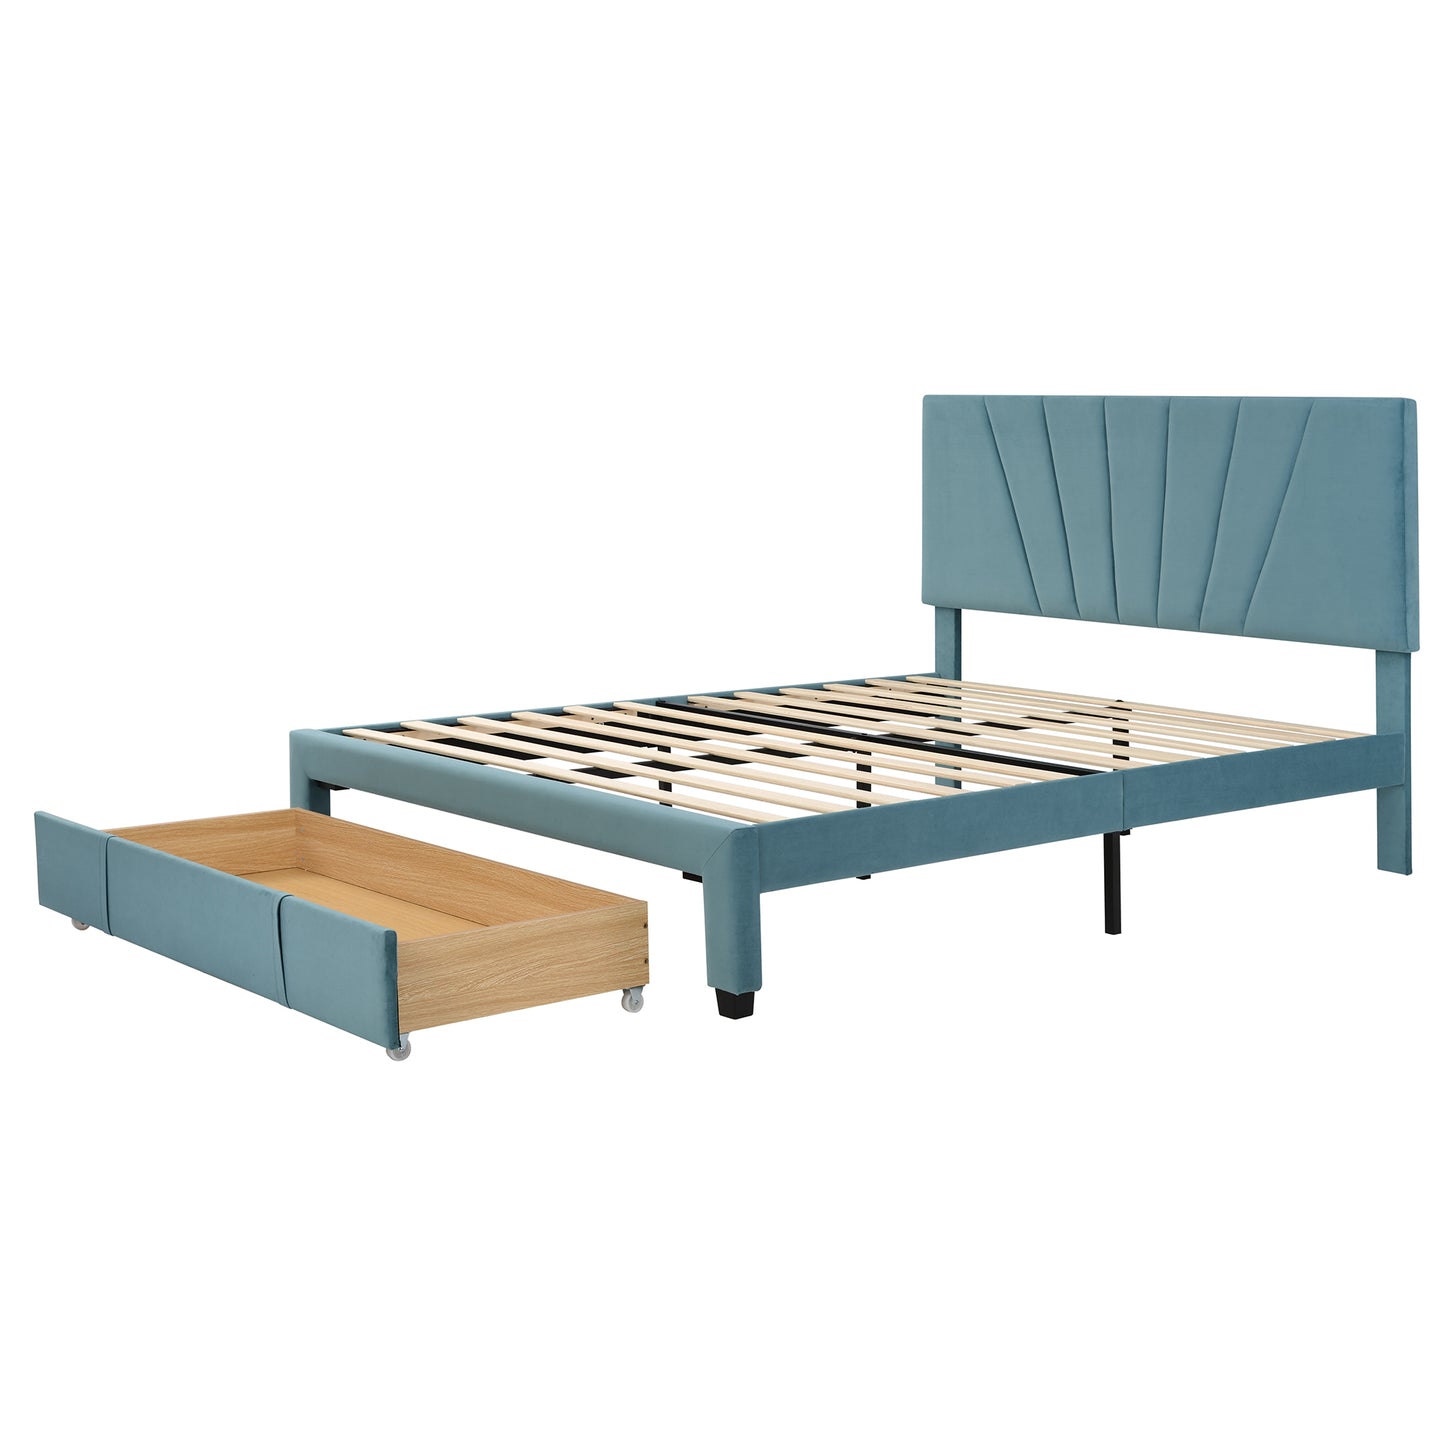 SYNGAR Upholstered Queen Platform Bed Frame with Storage Drawers, Queen Size Storage Bed with Velvet Headboard, Mattress Foundation with Strong Slats, No Box Spring Needed, Noise Free, Blue